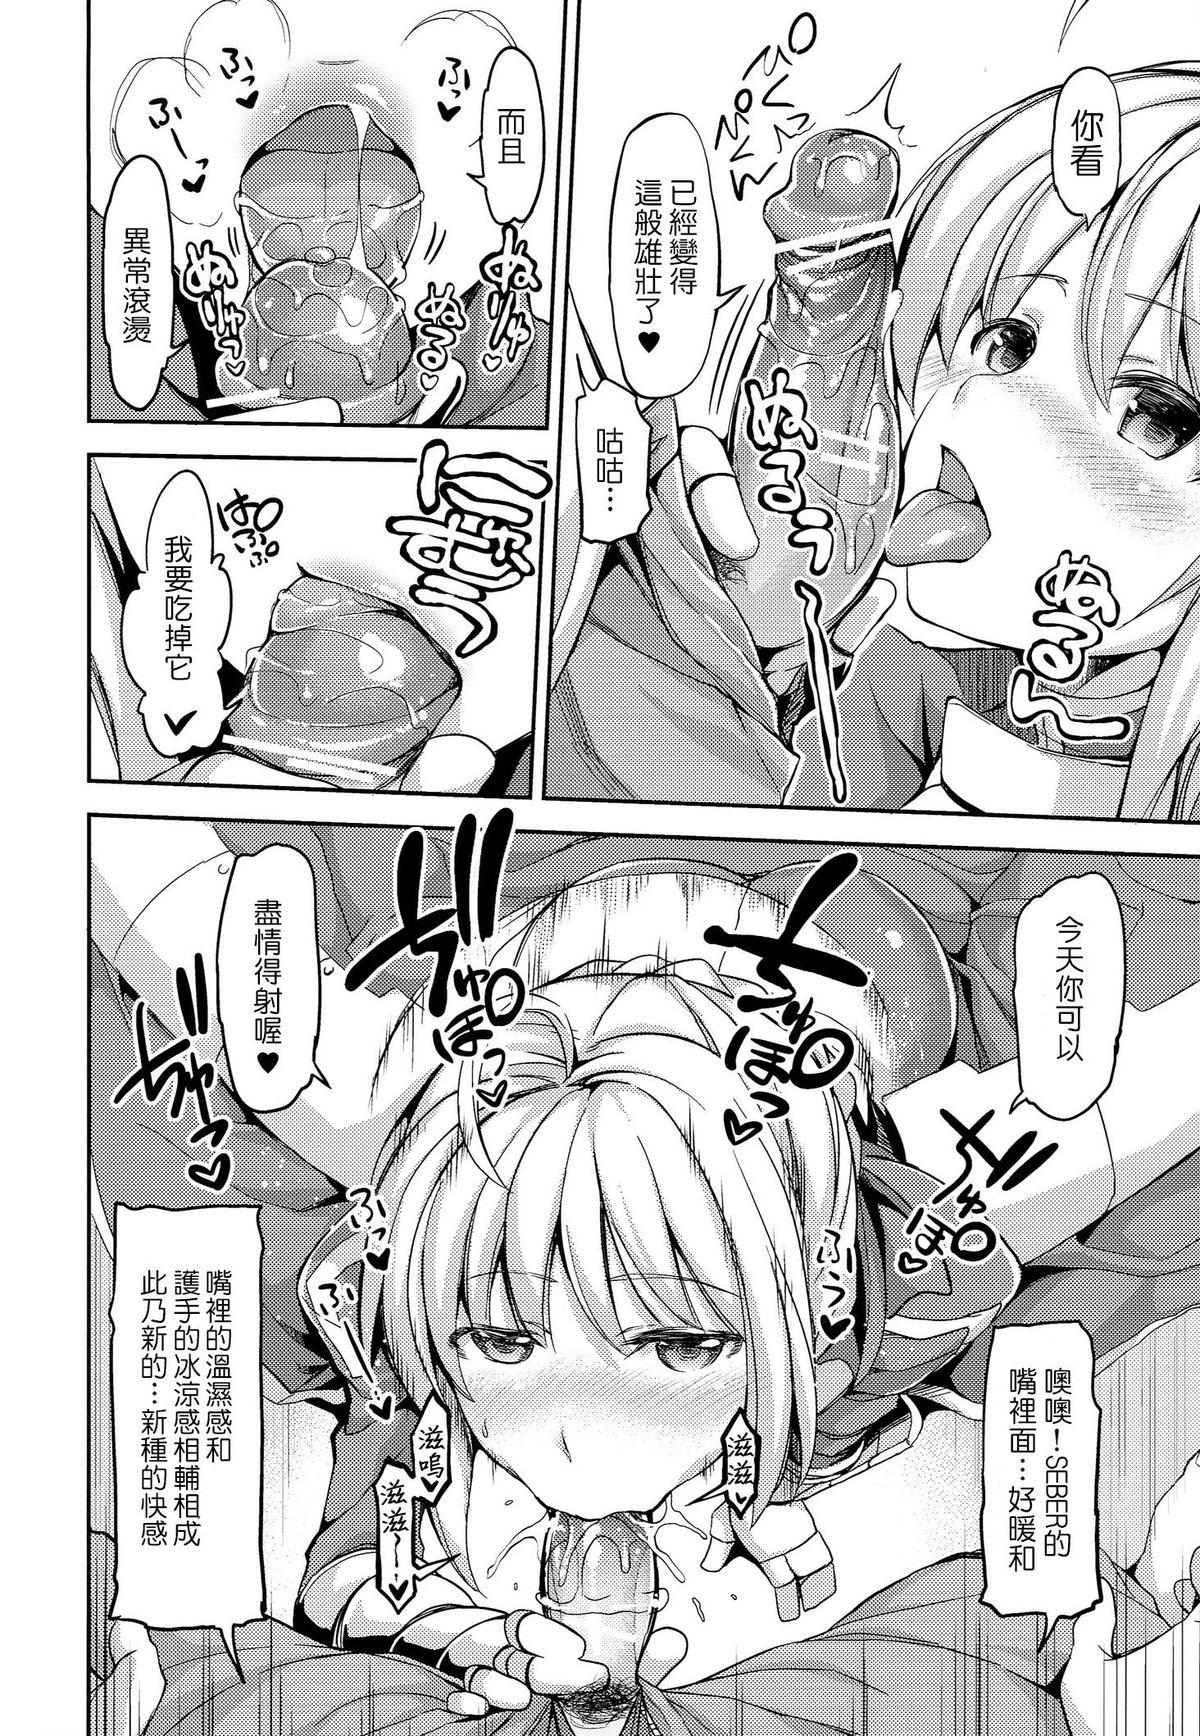 Str8 Fate delihell night - Fate stay night Roundass - Page 7